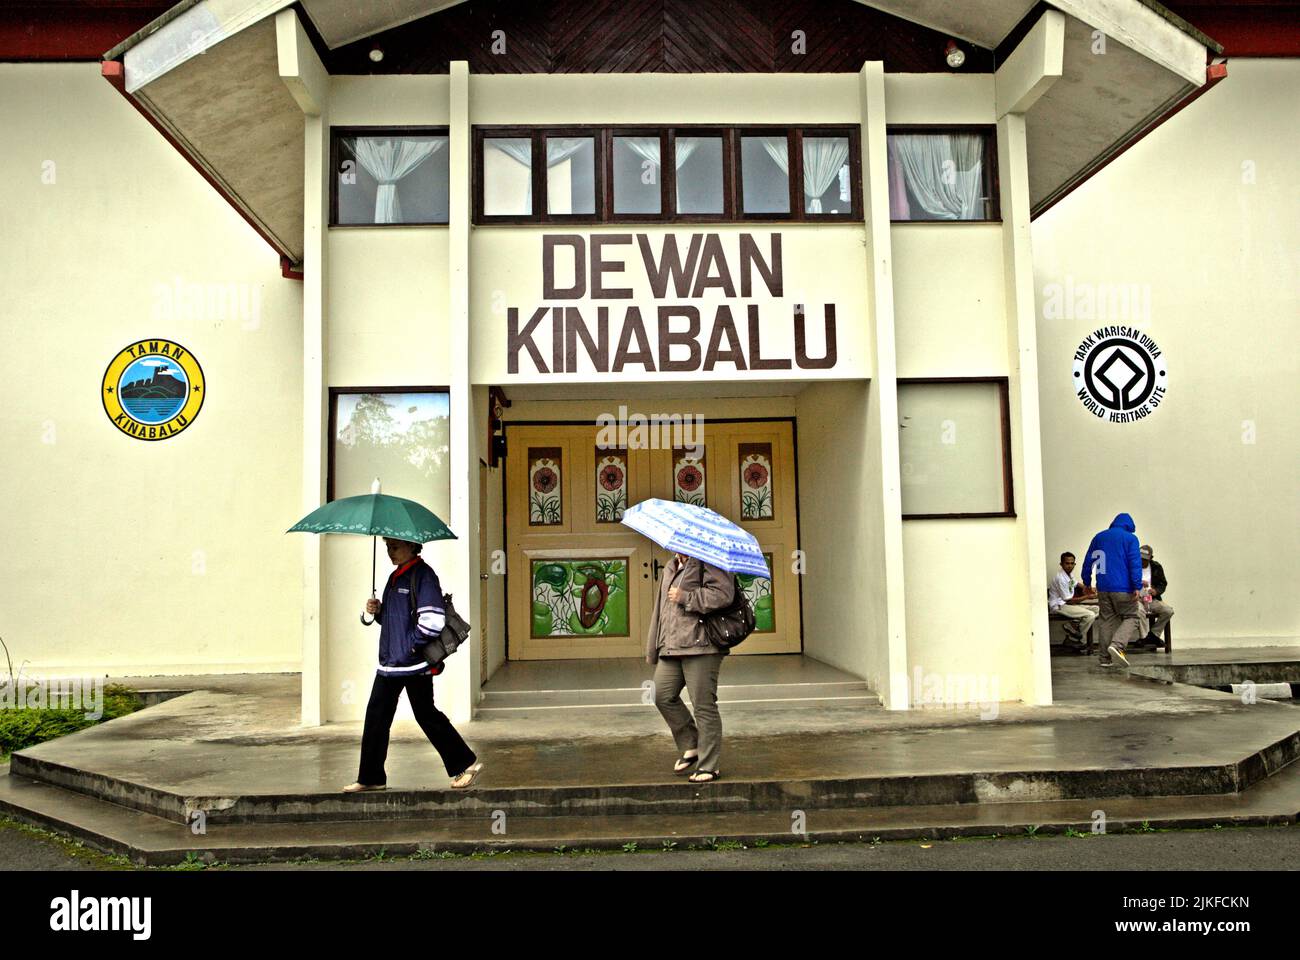 People carrying umbrellas as they are walking in front of the building of Dewan Kinabalu (Kinabalu Hall) in Kinabalu Park, Ranau, Sabah, Malaysia. Stock Photo